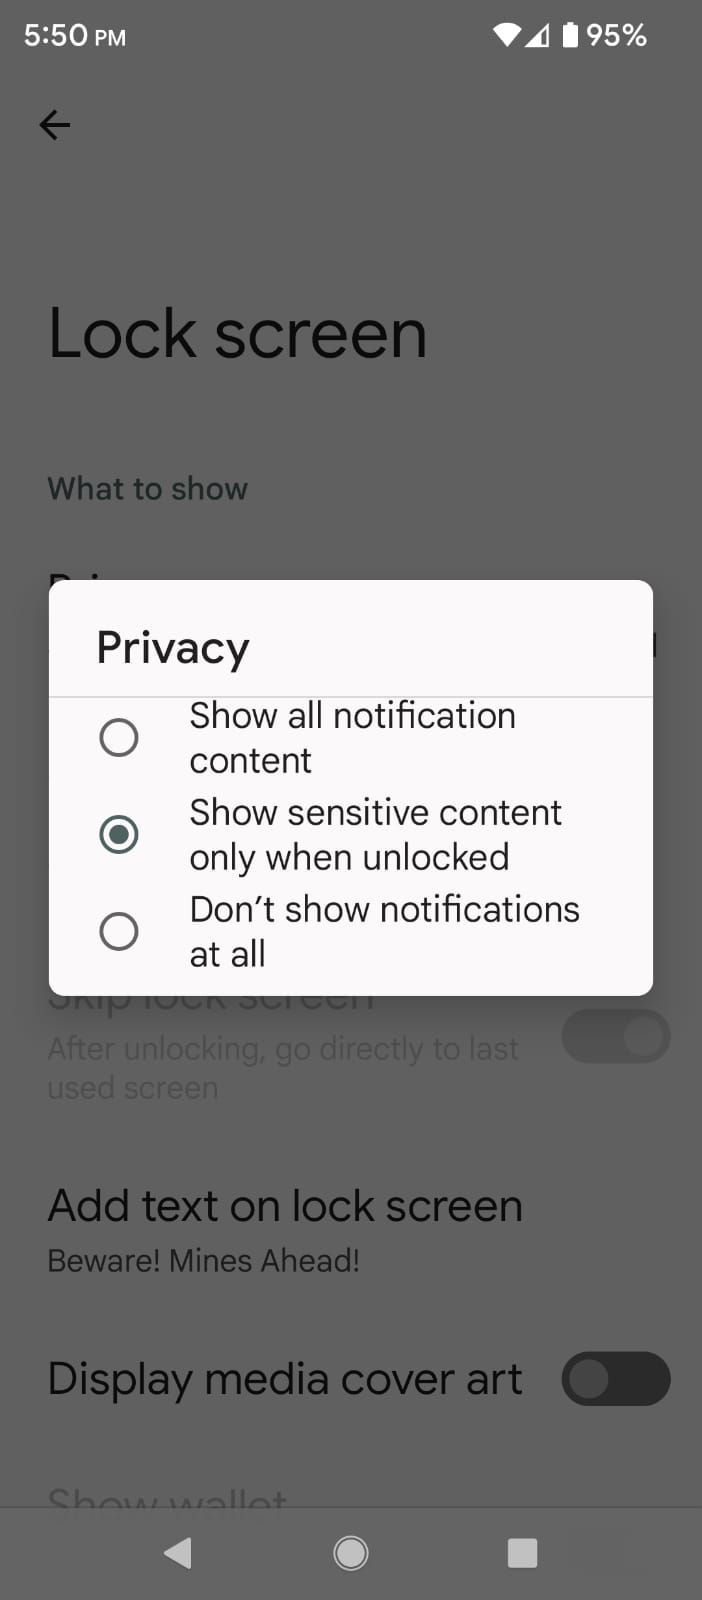 Lock screen Privacy Options in Android Display Settings